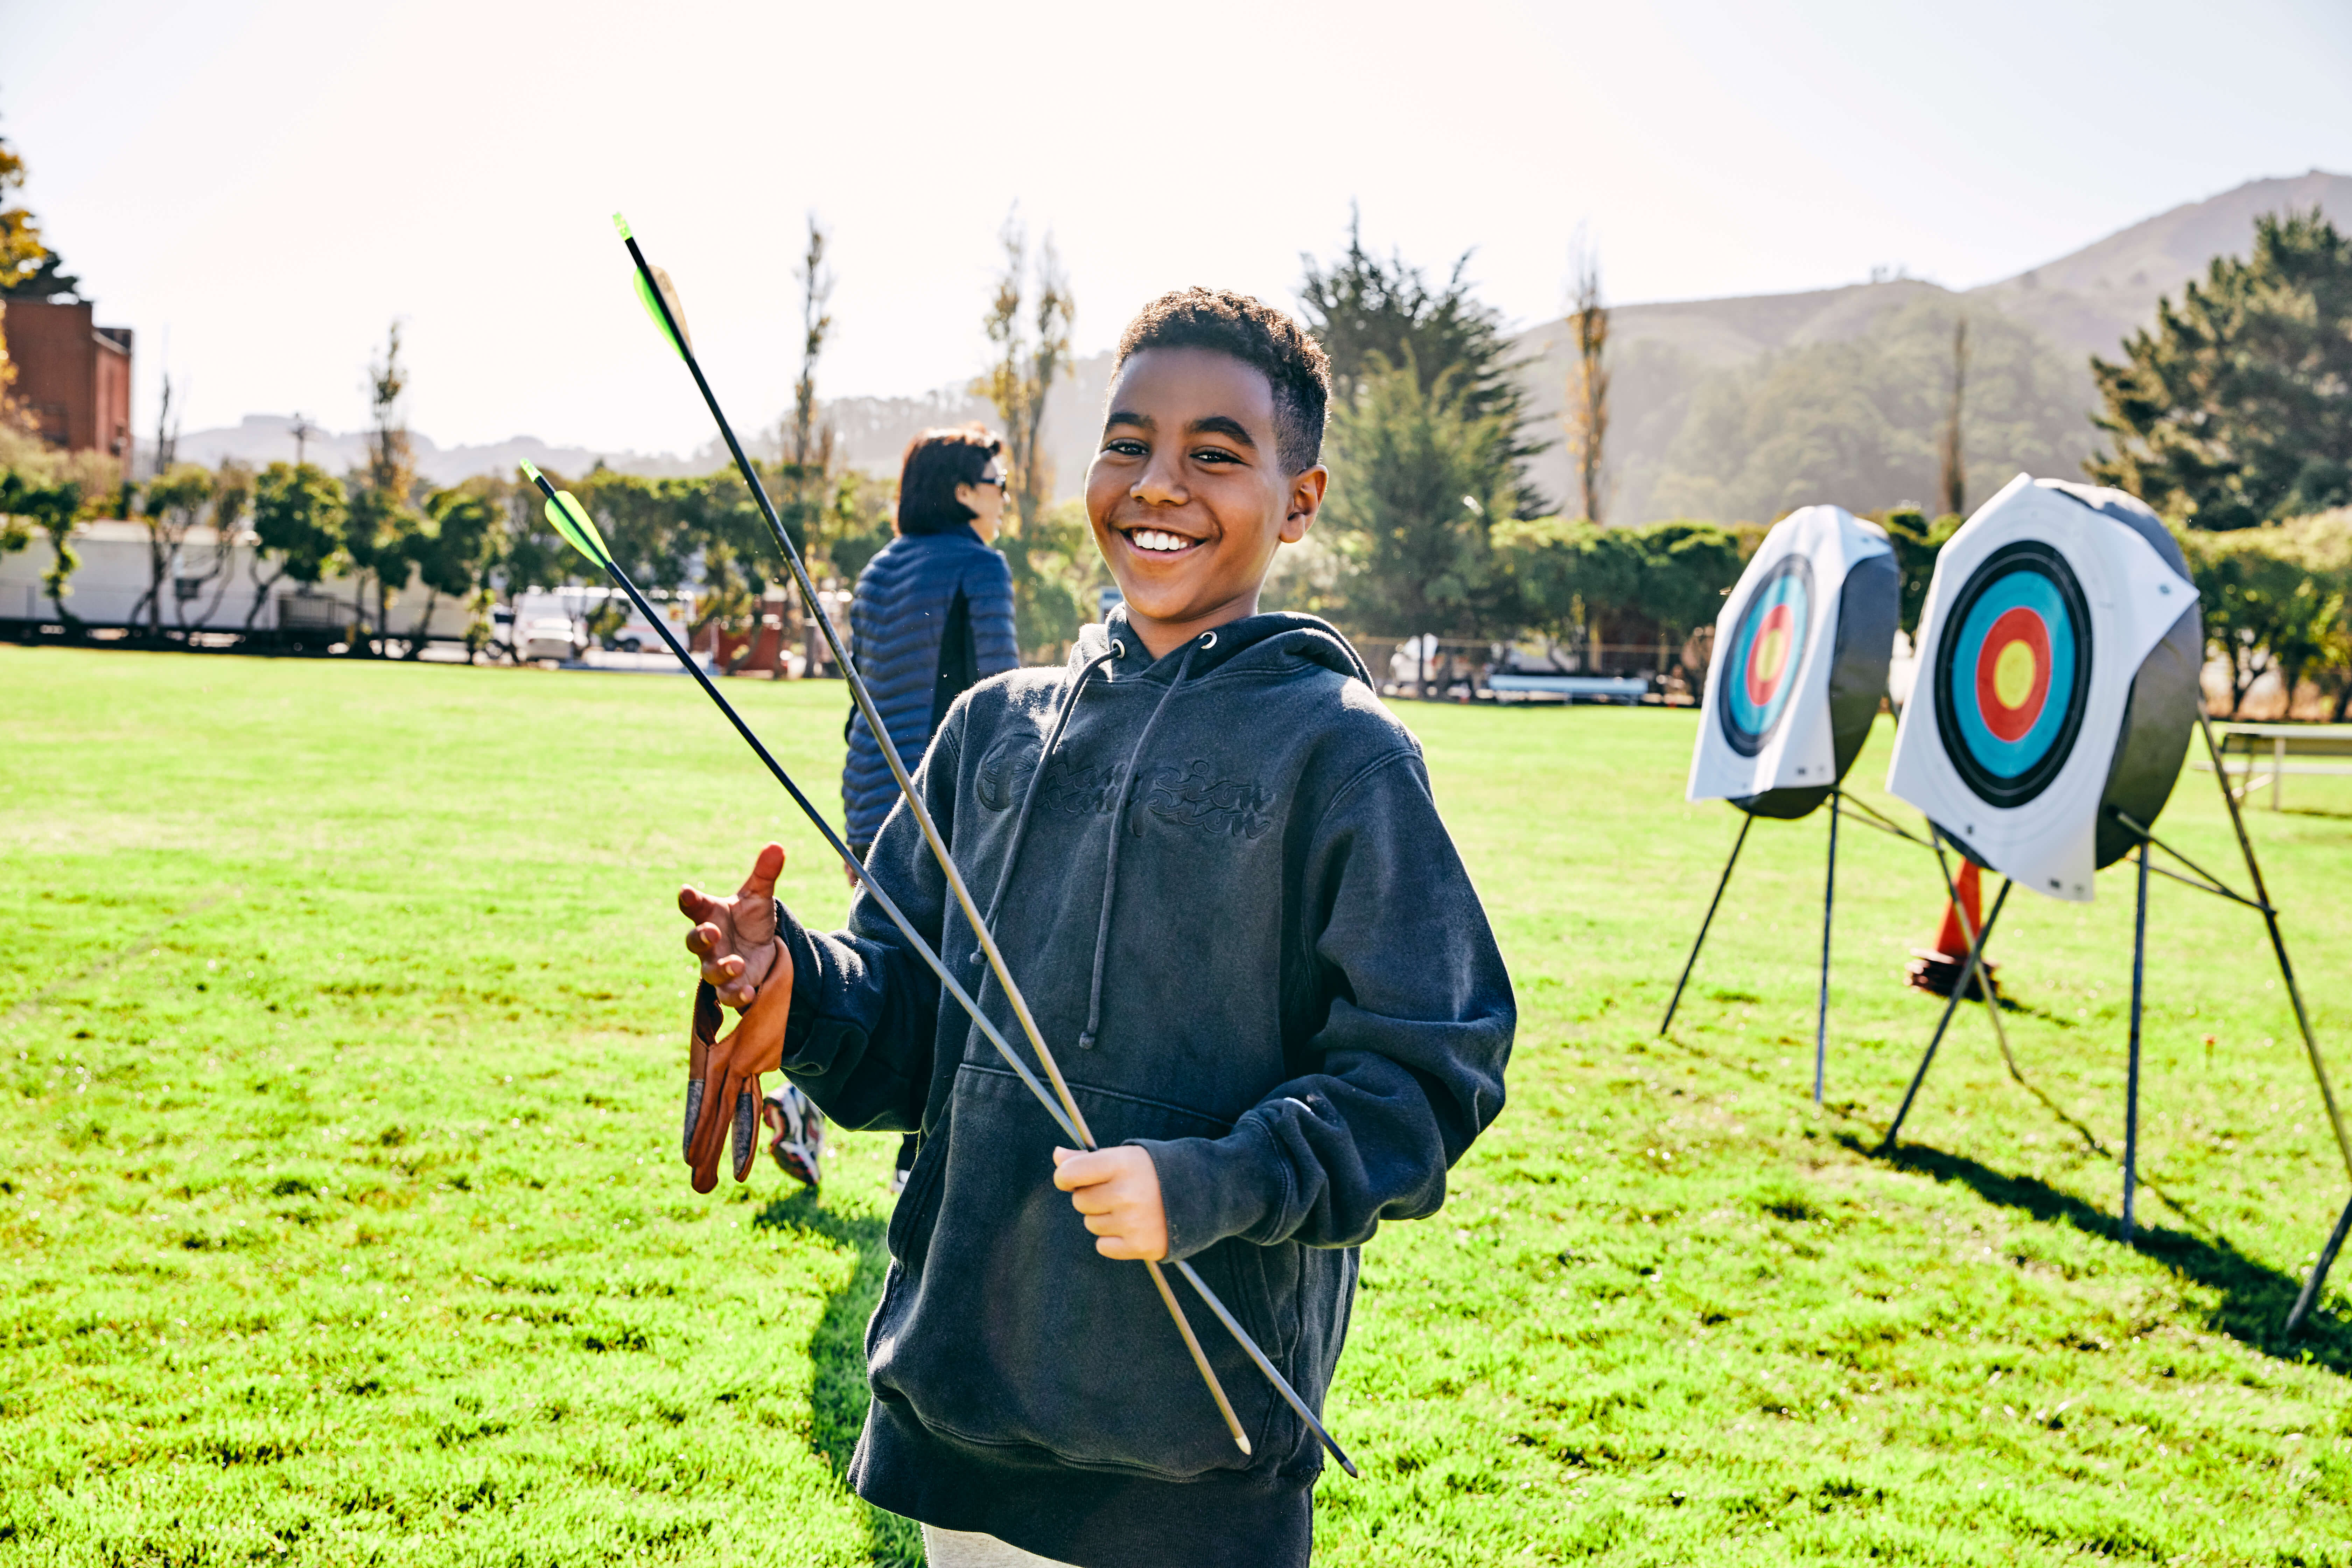 boy holding bow and arrows in front of archery targets